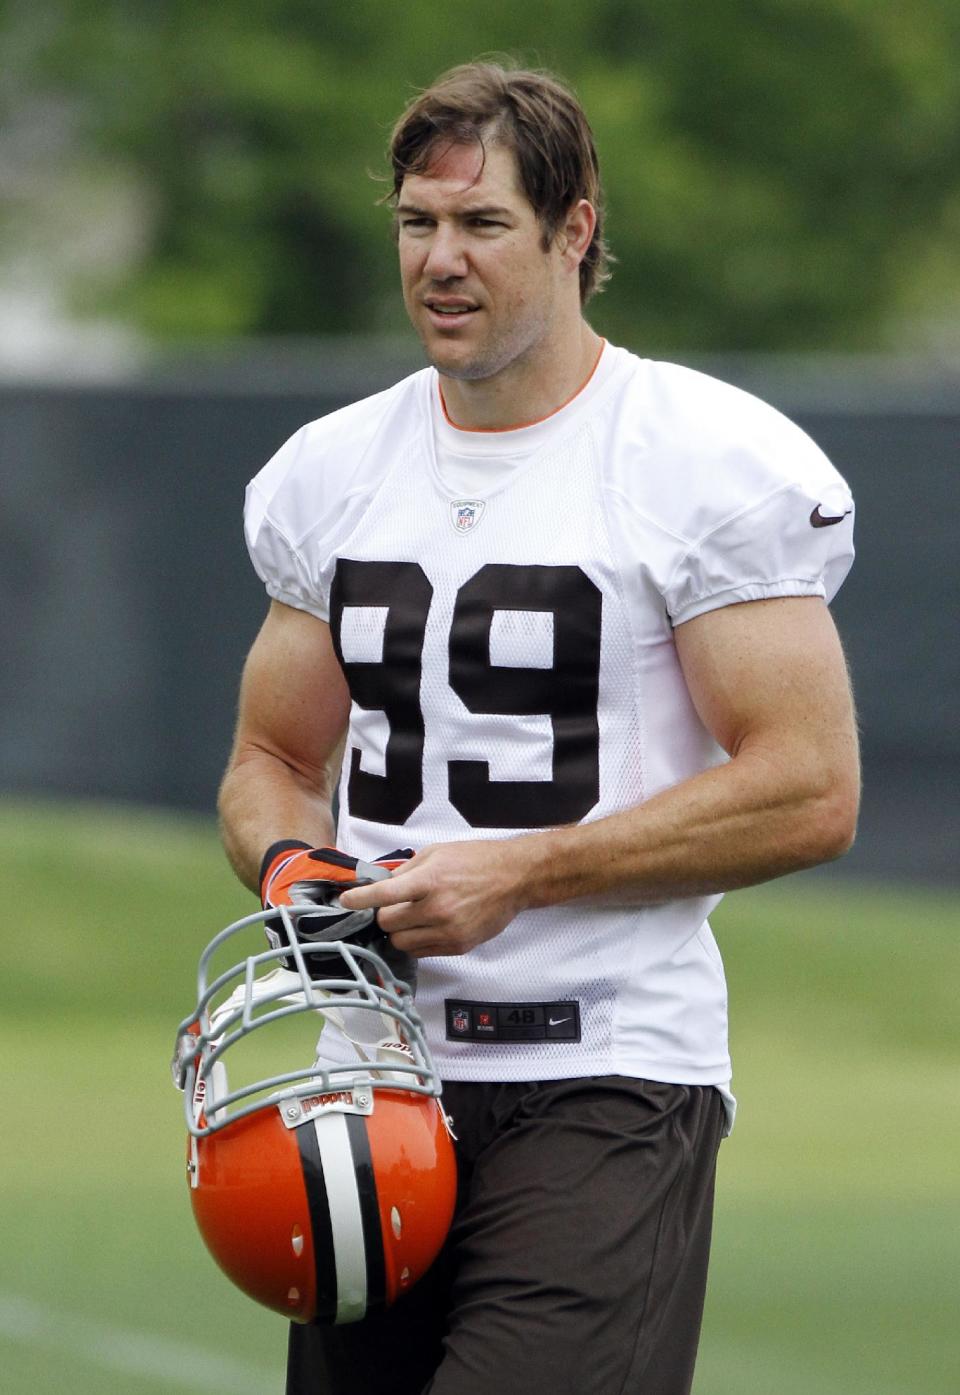 Cleveland Browns linebacker Scott Fujita walks off the field after NFL football practice at the team's headquarters in Berea, Ohio Tuesday, May 22, 2012. (AP Photo/Mark Duncan)